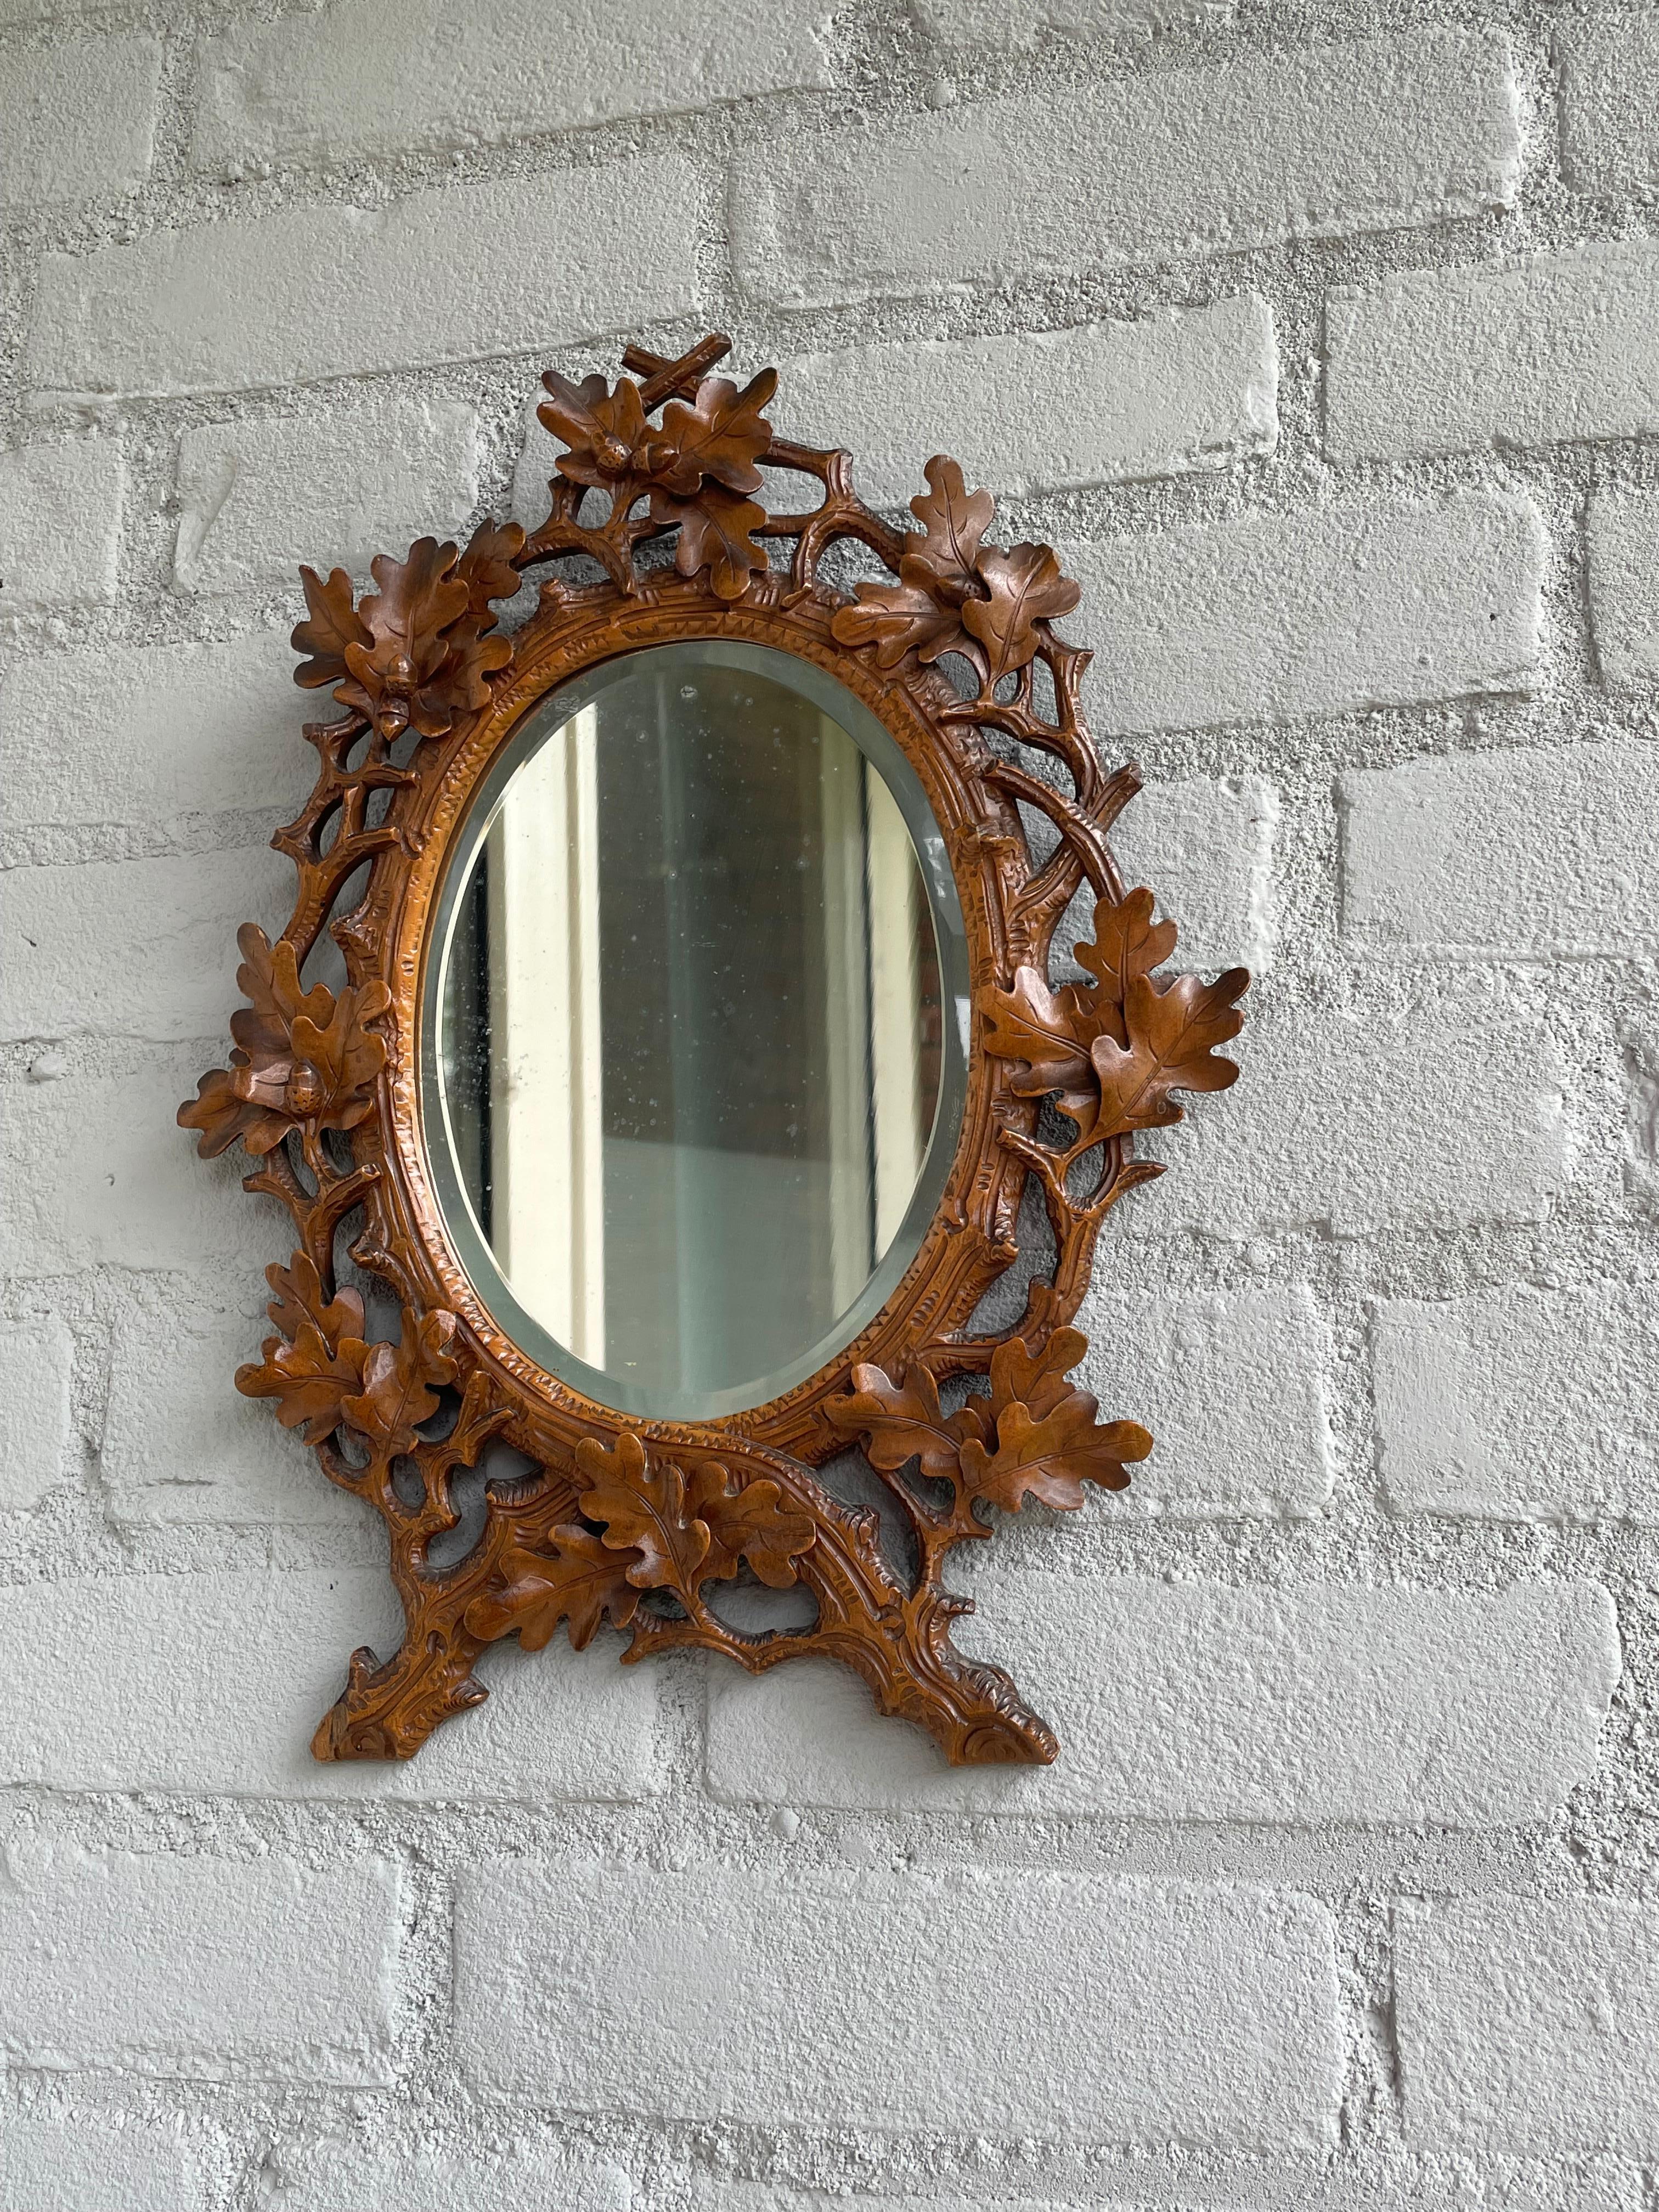 Wood Stunning Little, Finest Quality Hand Carved Antique Black Forest Wall Mirror